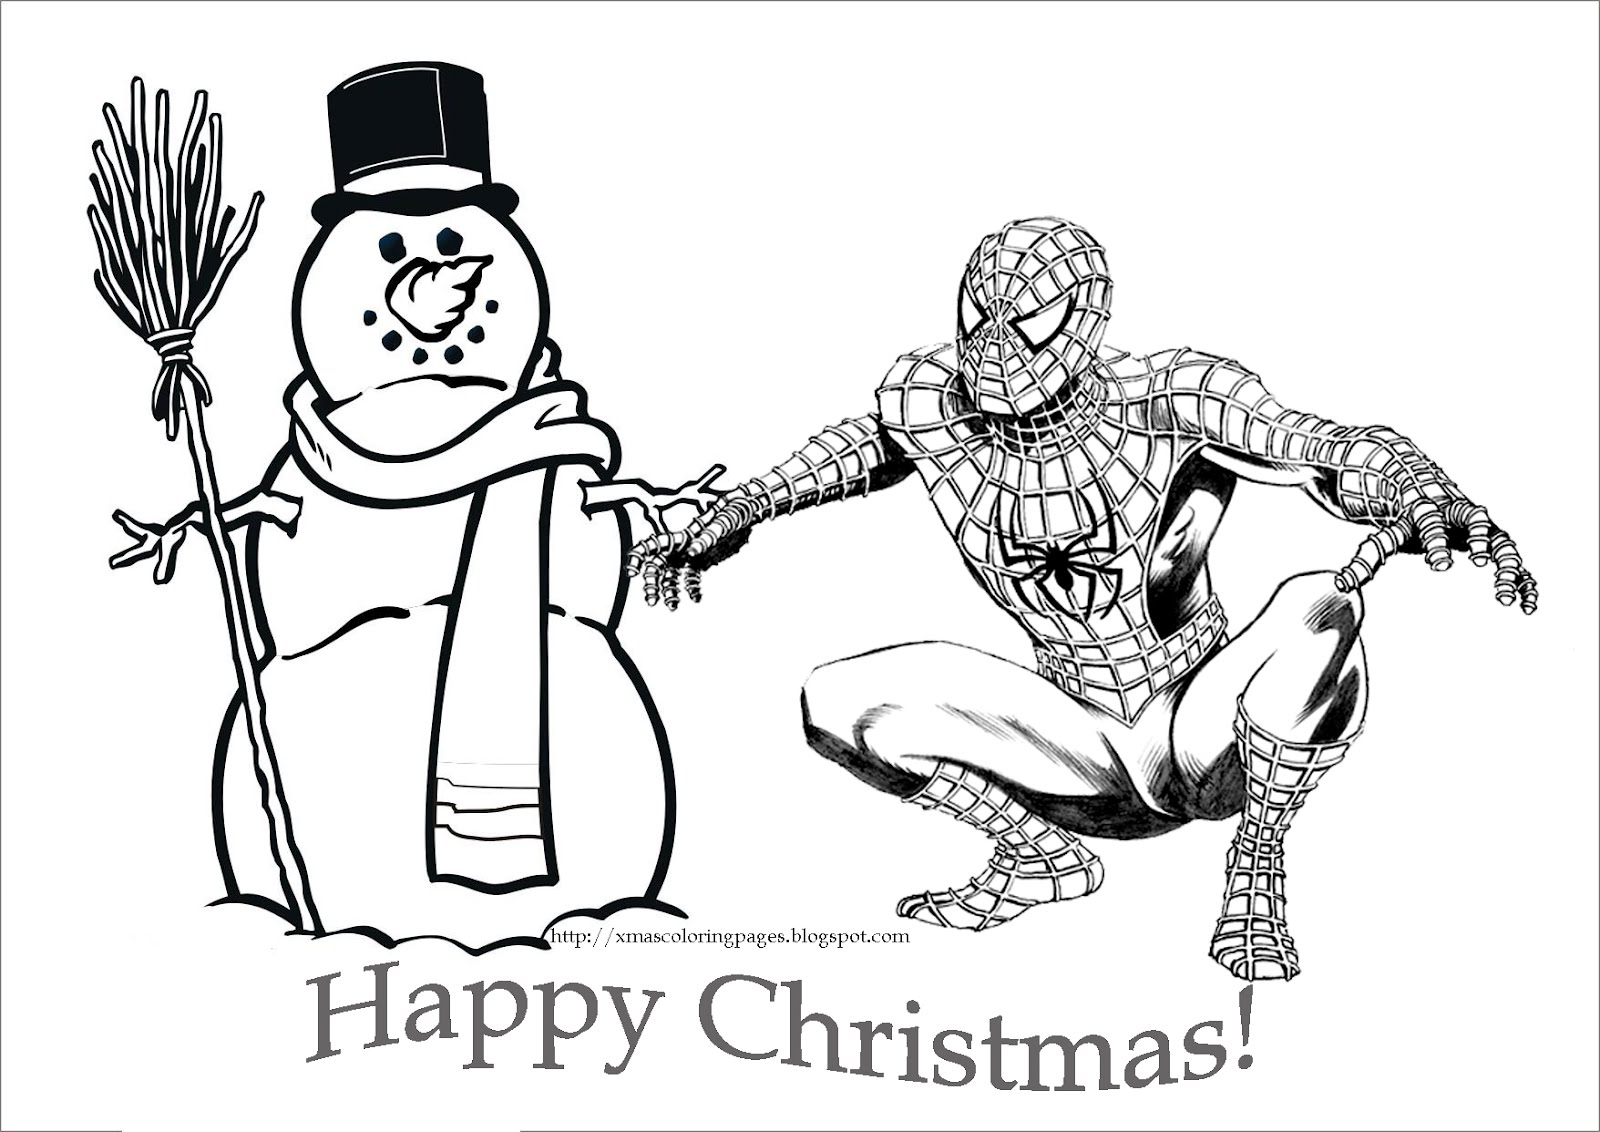 Ultimate Spider Man Clipart